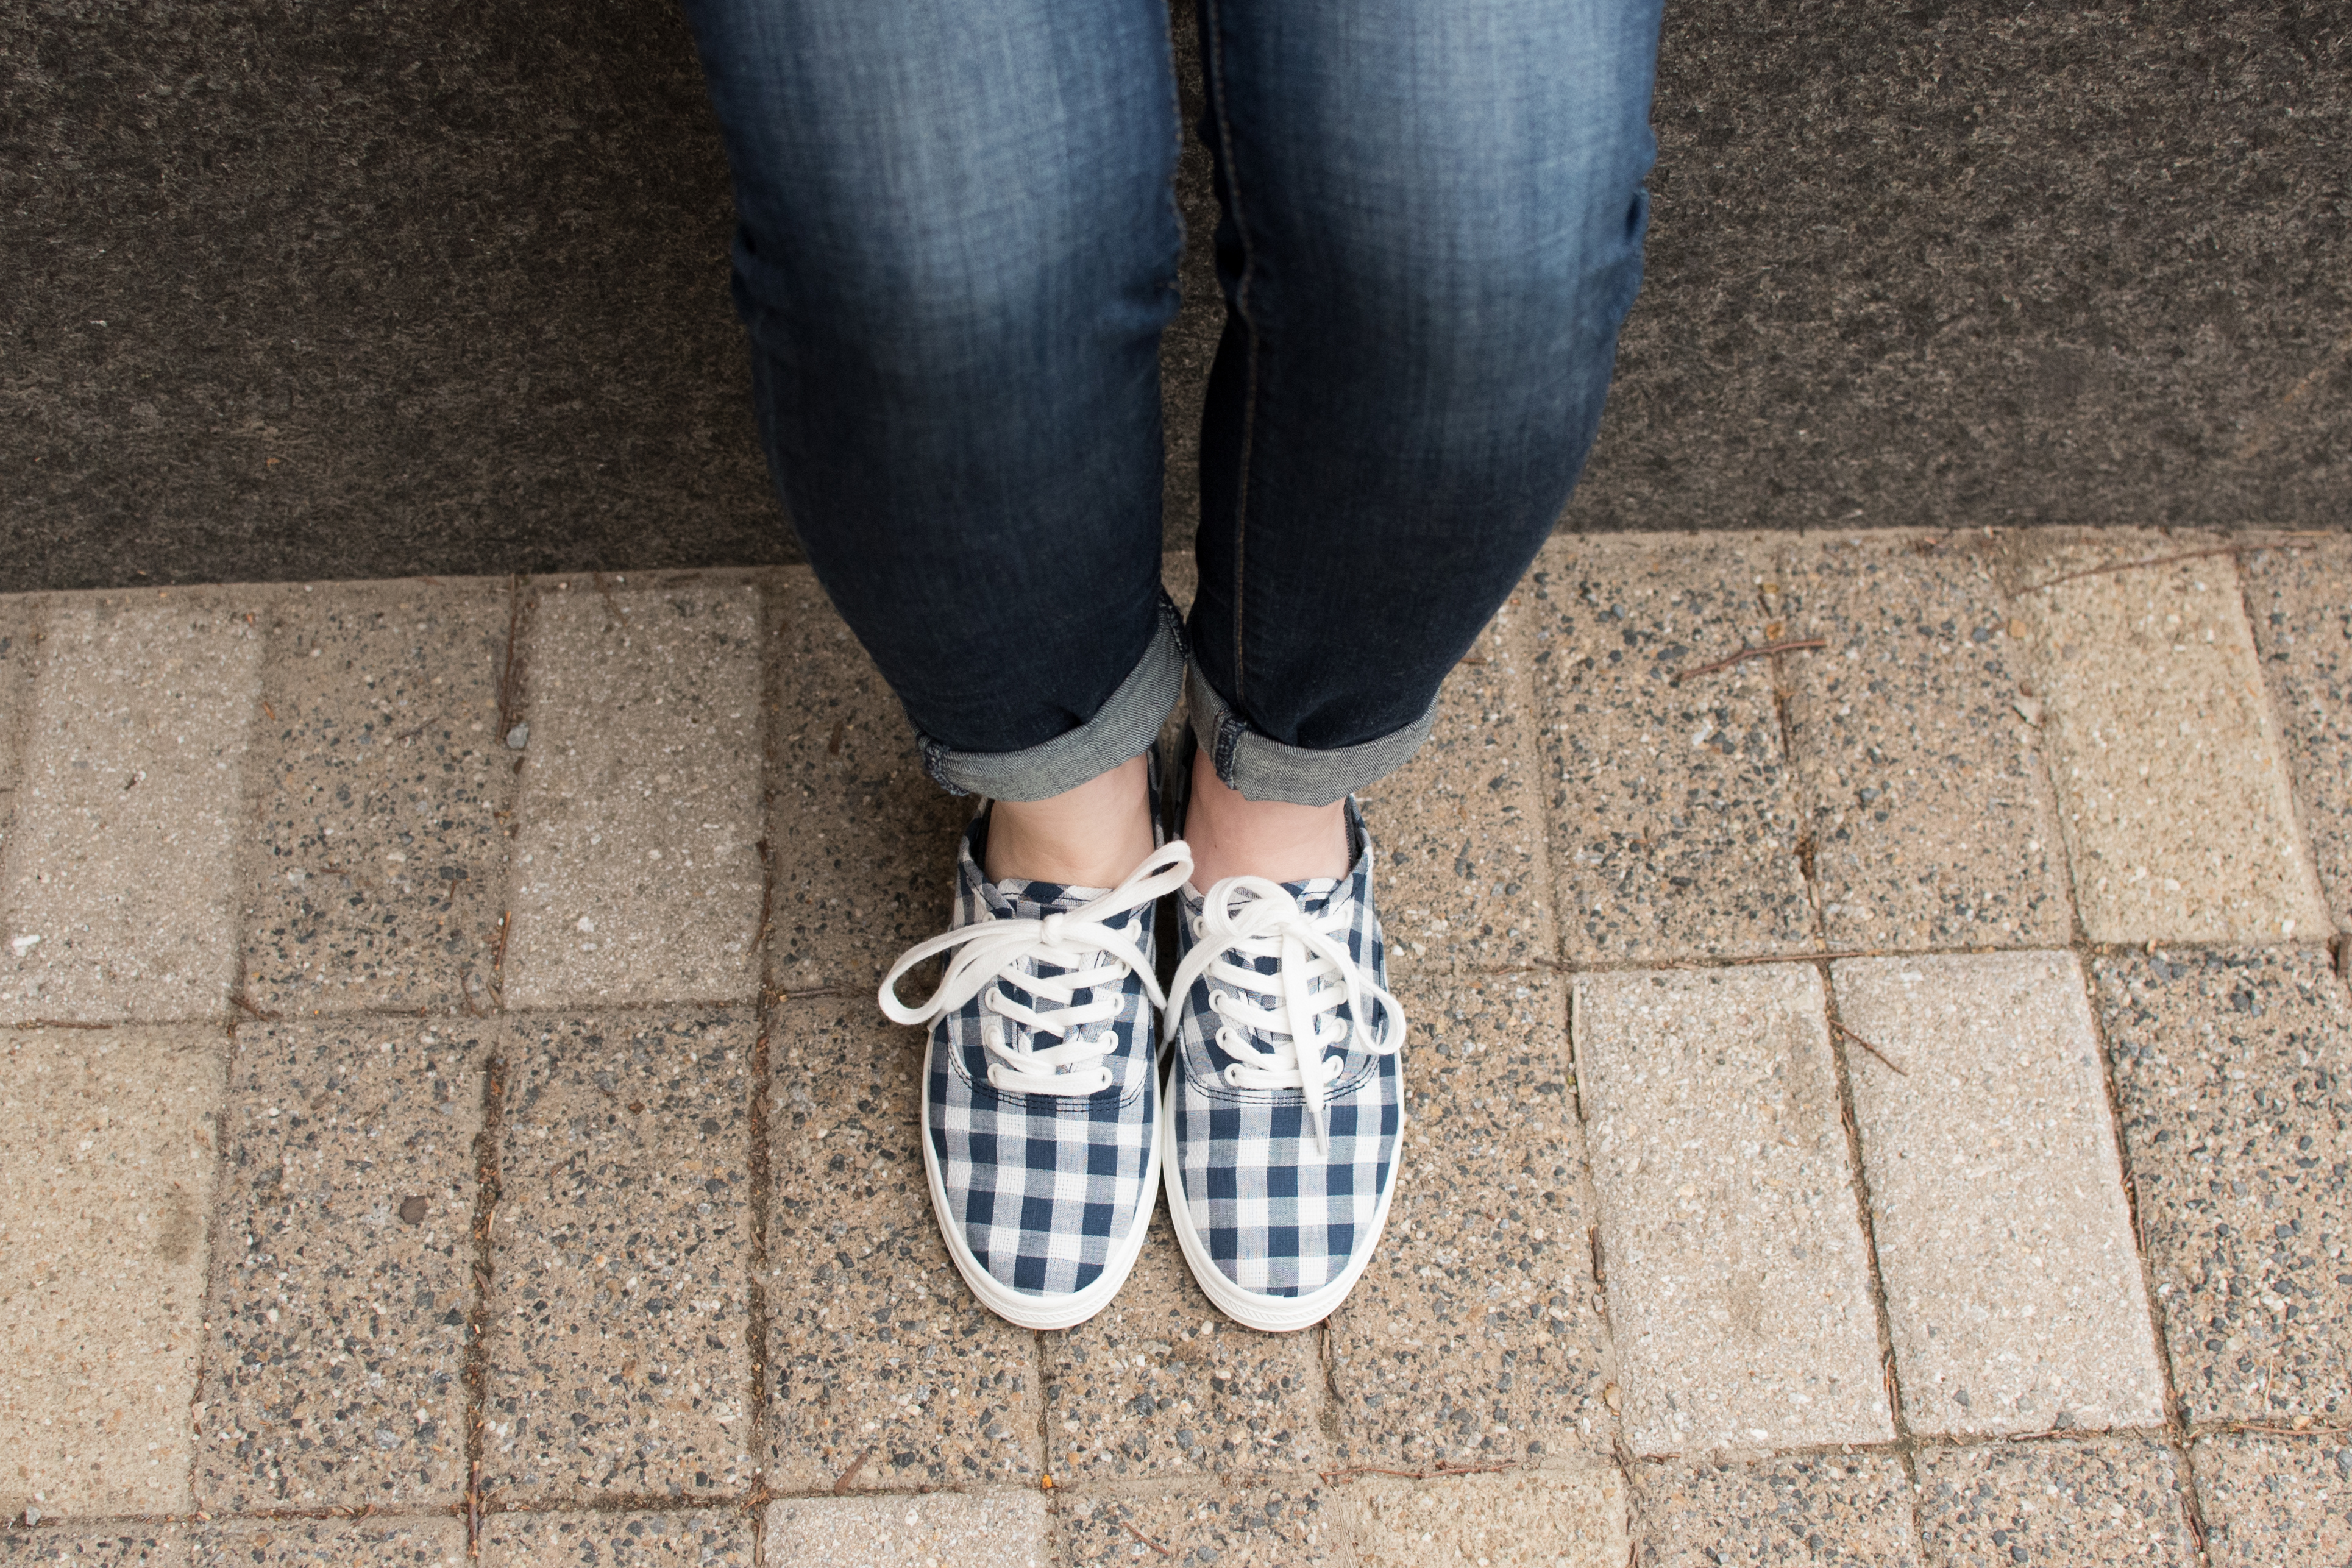 The Gingham Tennis Shoes | Something Good, @danaerinw target, target style